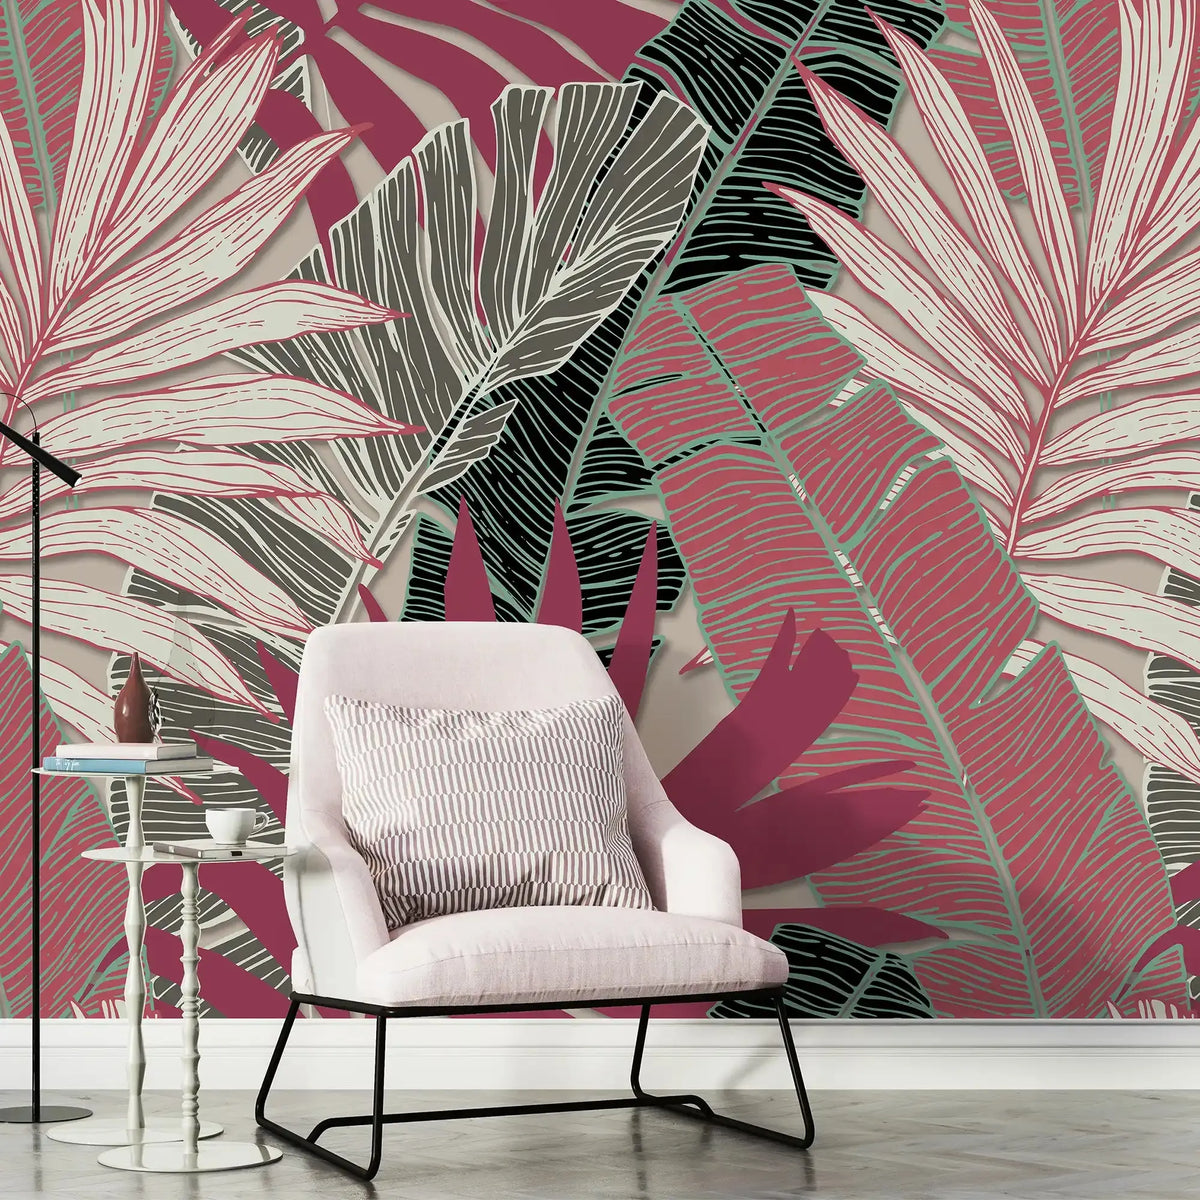 3103-D / Botanical Wall Mural - Self Adhesive, Palm Leaf Tropical Wallpaper for Any Room - Artevella